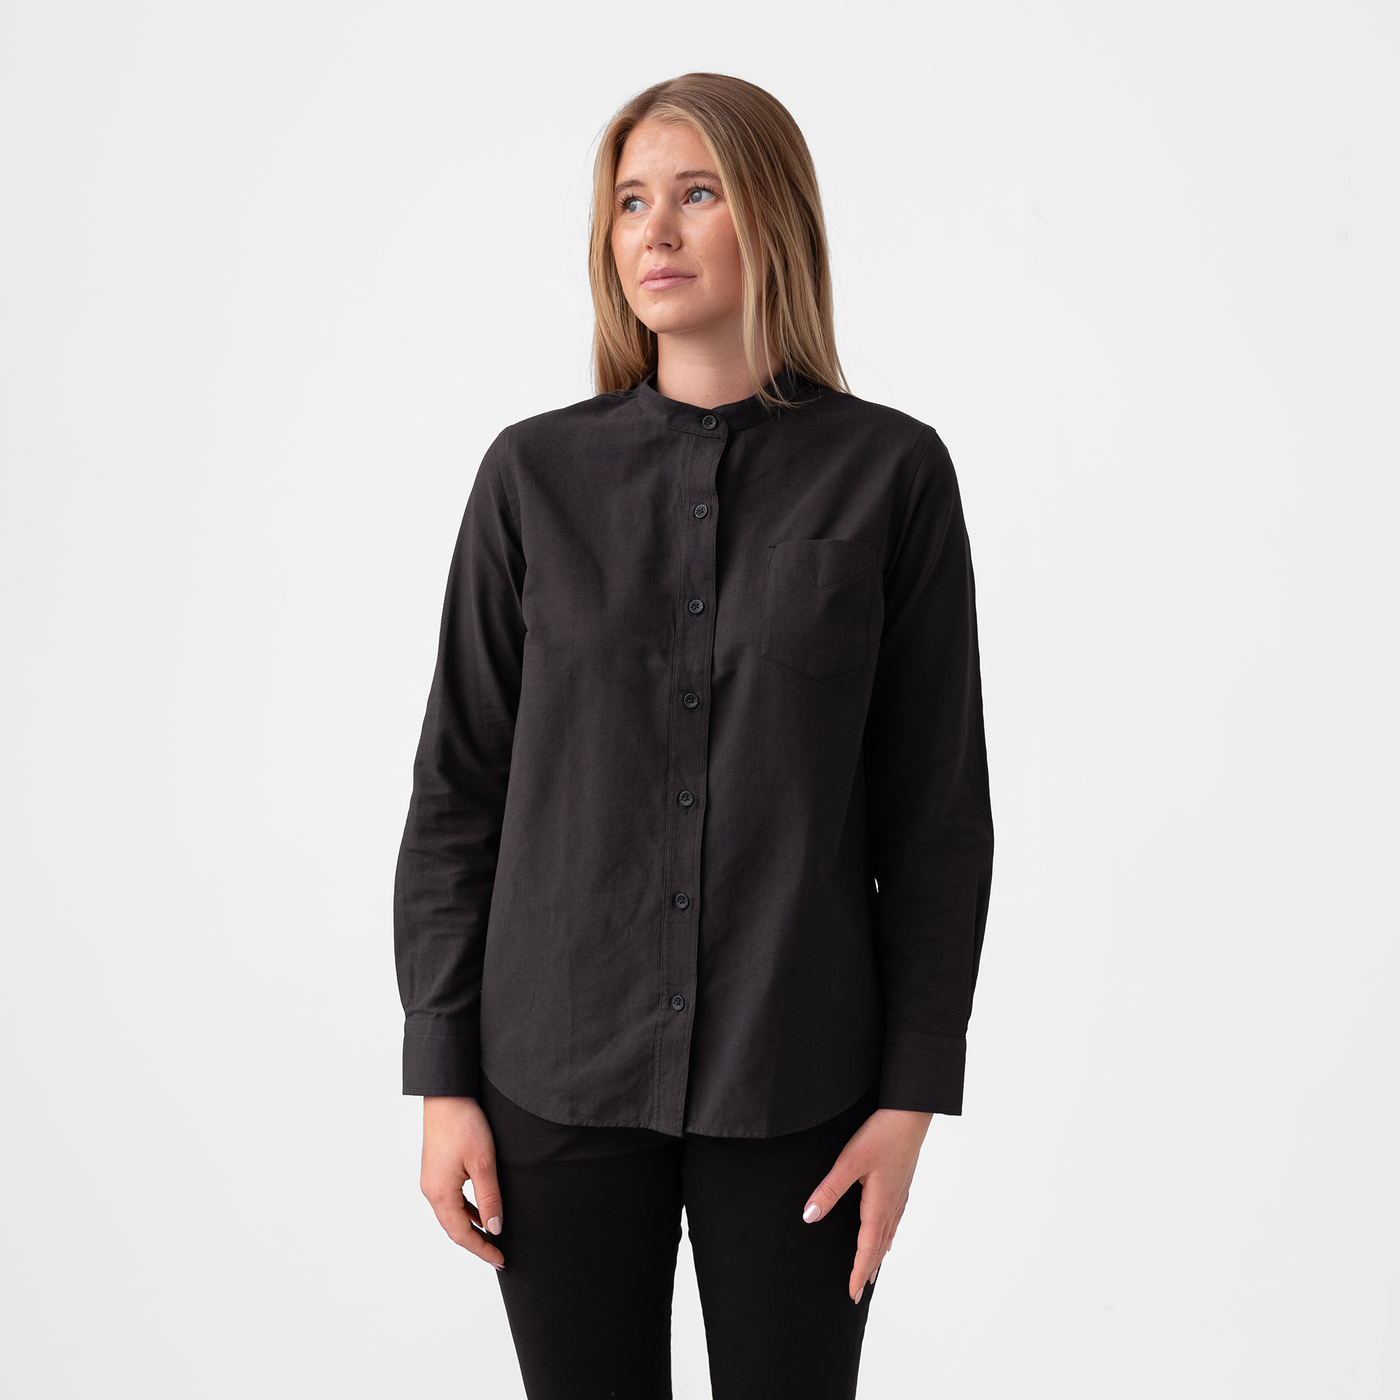 Women's Black Banded Collar Service Oxford